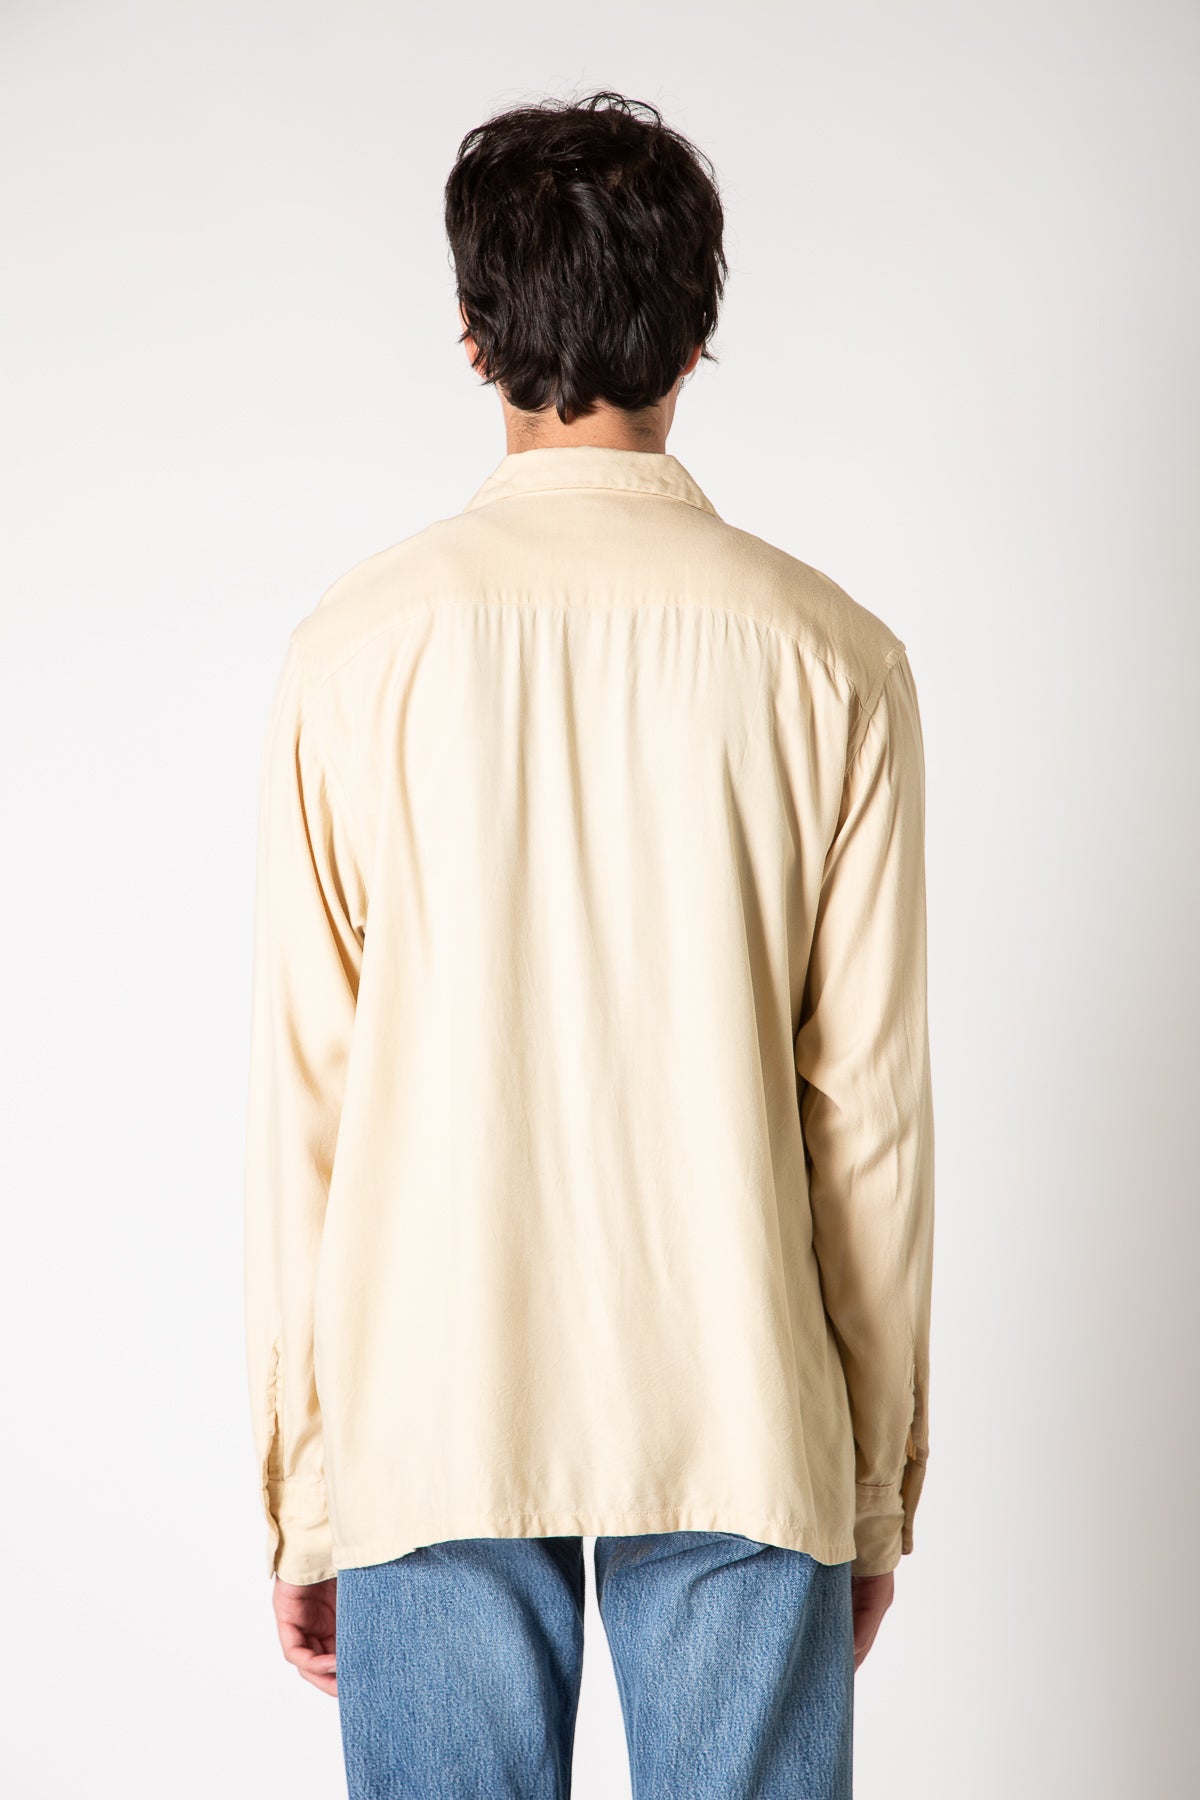 NOMA T.D. | LINES EMBROIDERY LONG SLEEVE SHIRT